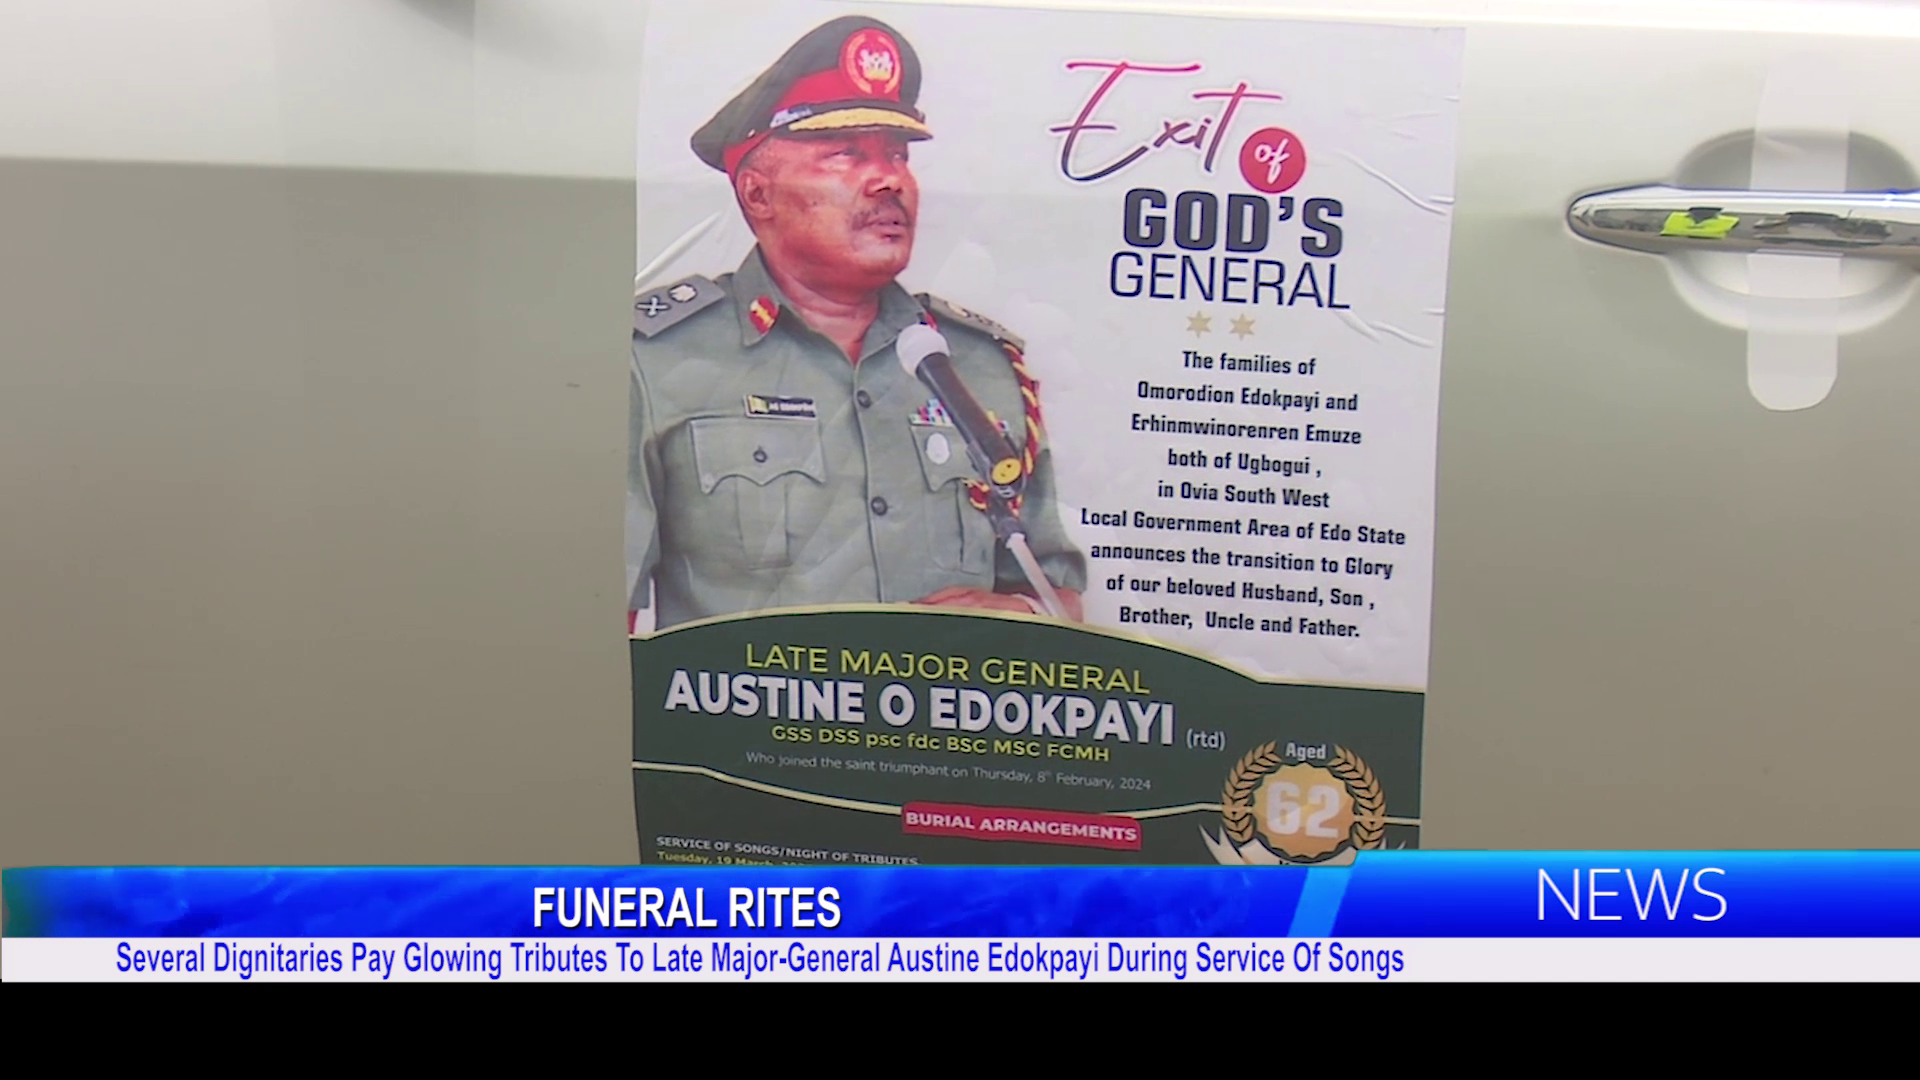 Several Dignitaries Pay Glowing Tributes To Late Major-General Austine Edokpayi During Service Of Songs